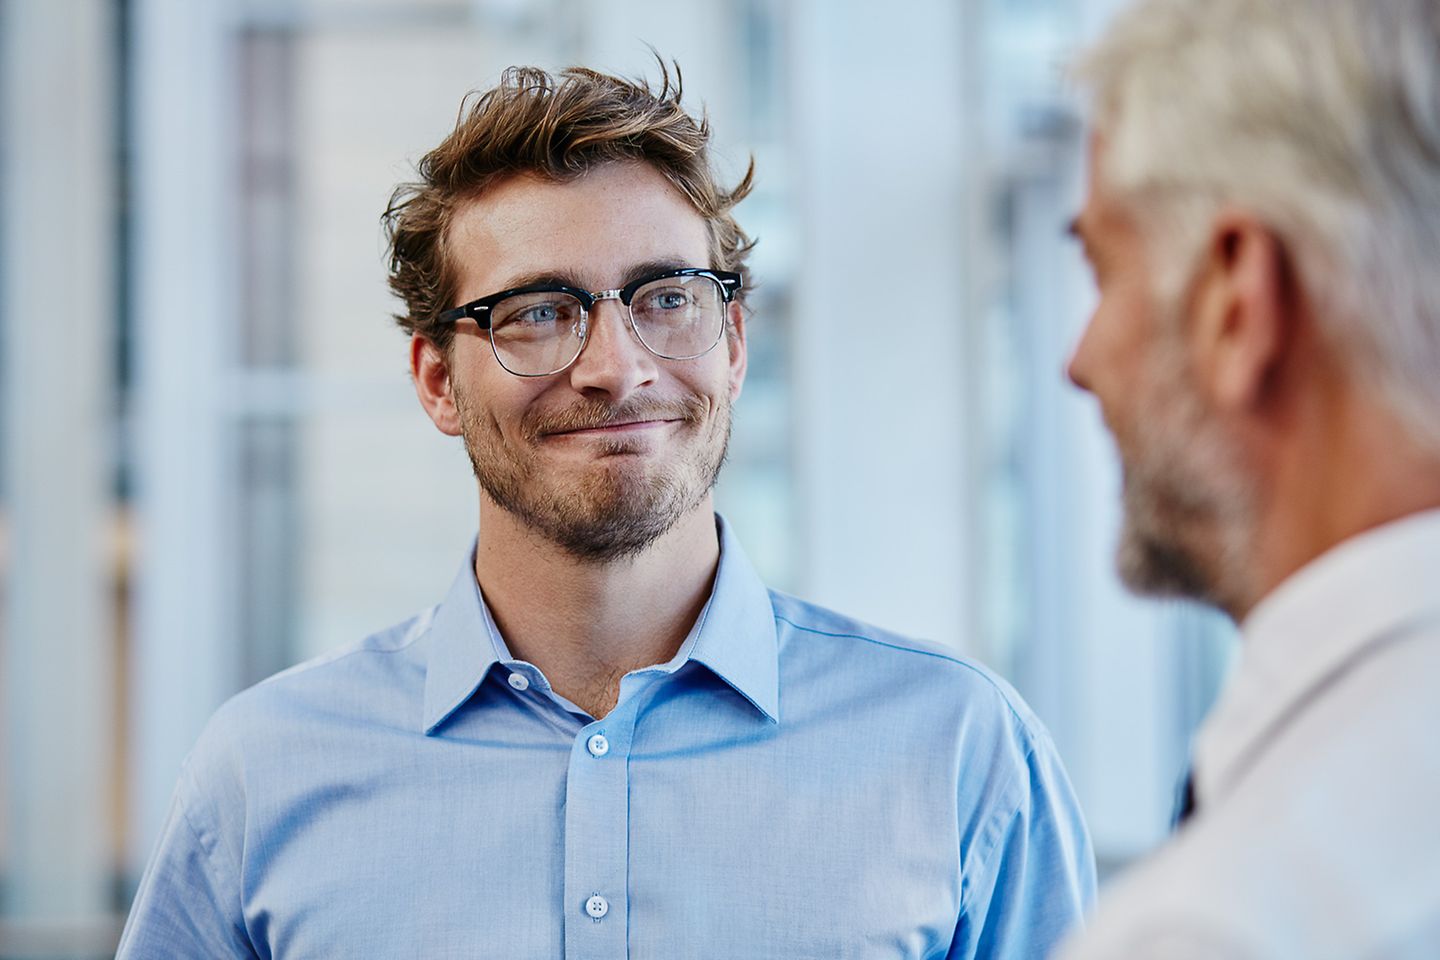 Younger businessman with glasses looks smiling to older businessman